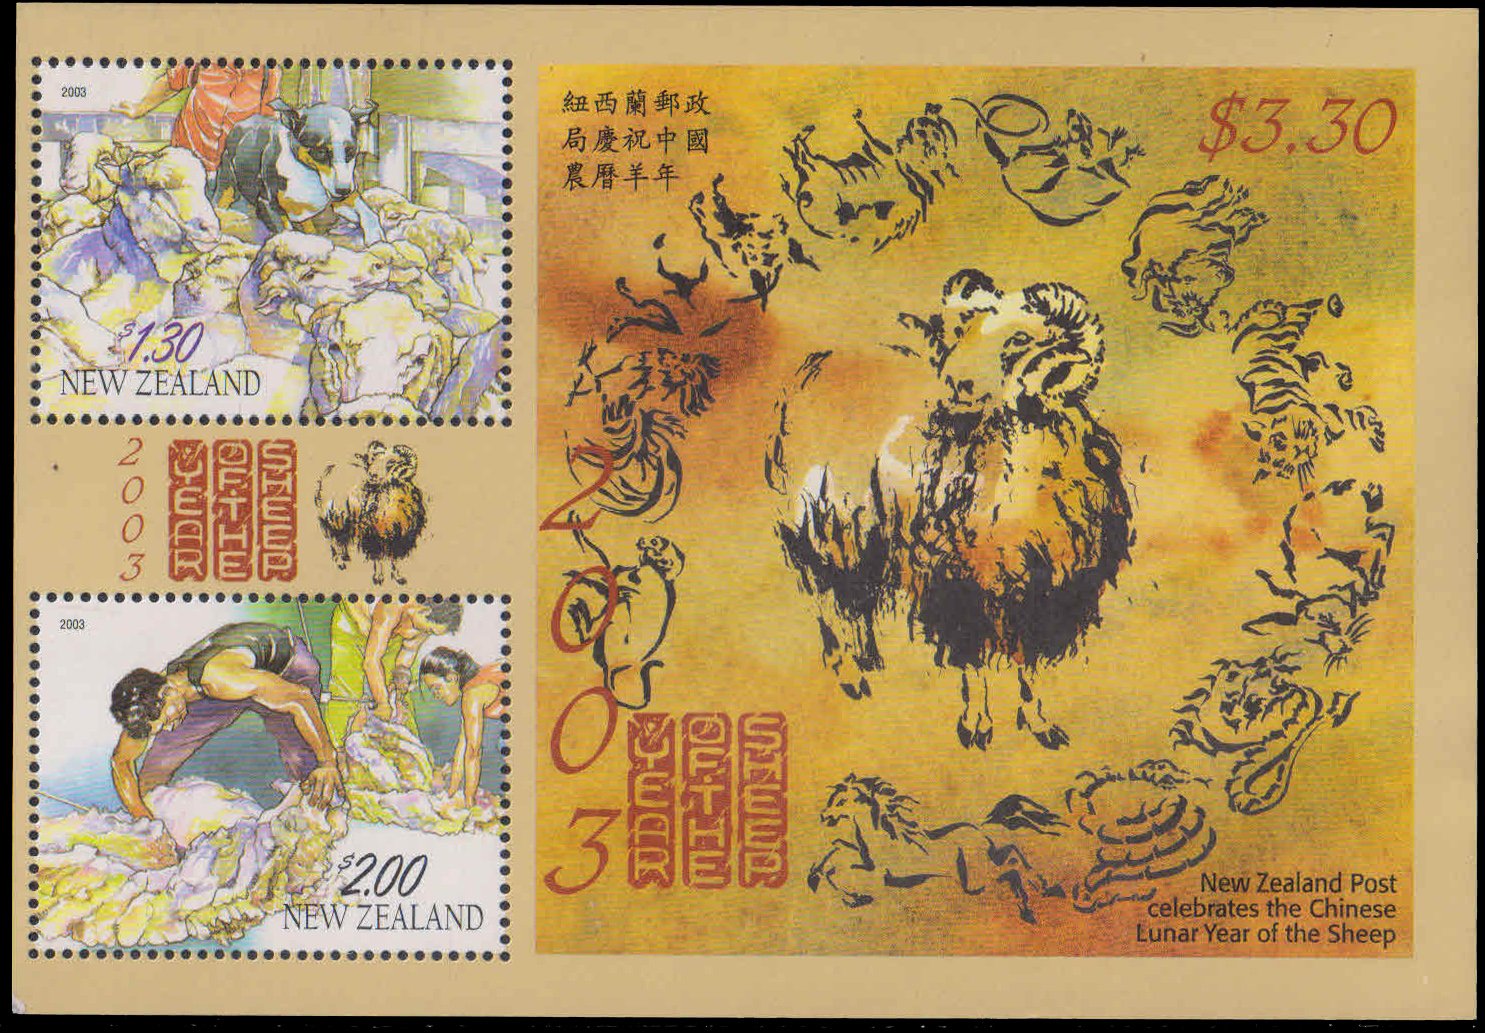 NEW ZEALAND 2003-Chinese New Year of the sheep, Sheep Farming, Sheet of 2, MNH, S.G. MS 2571